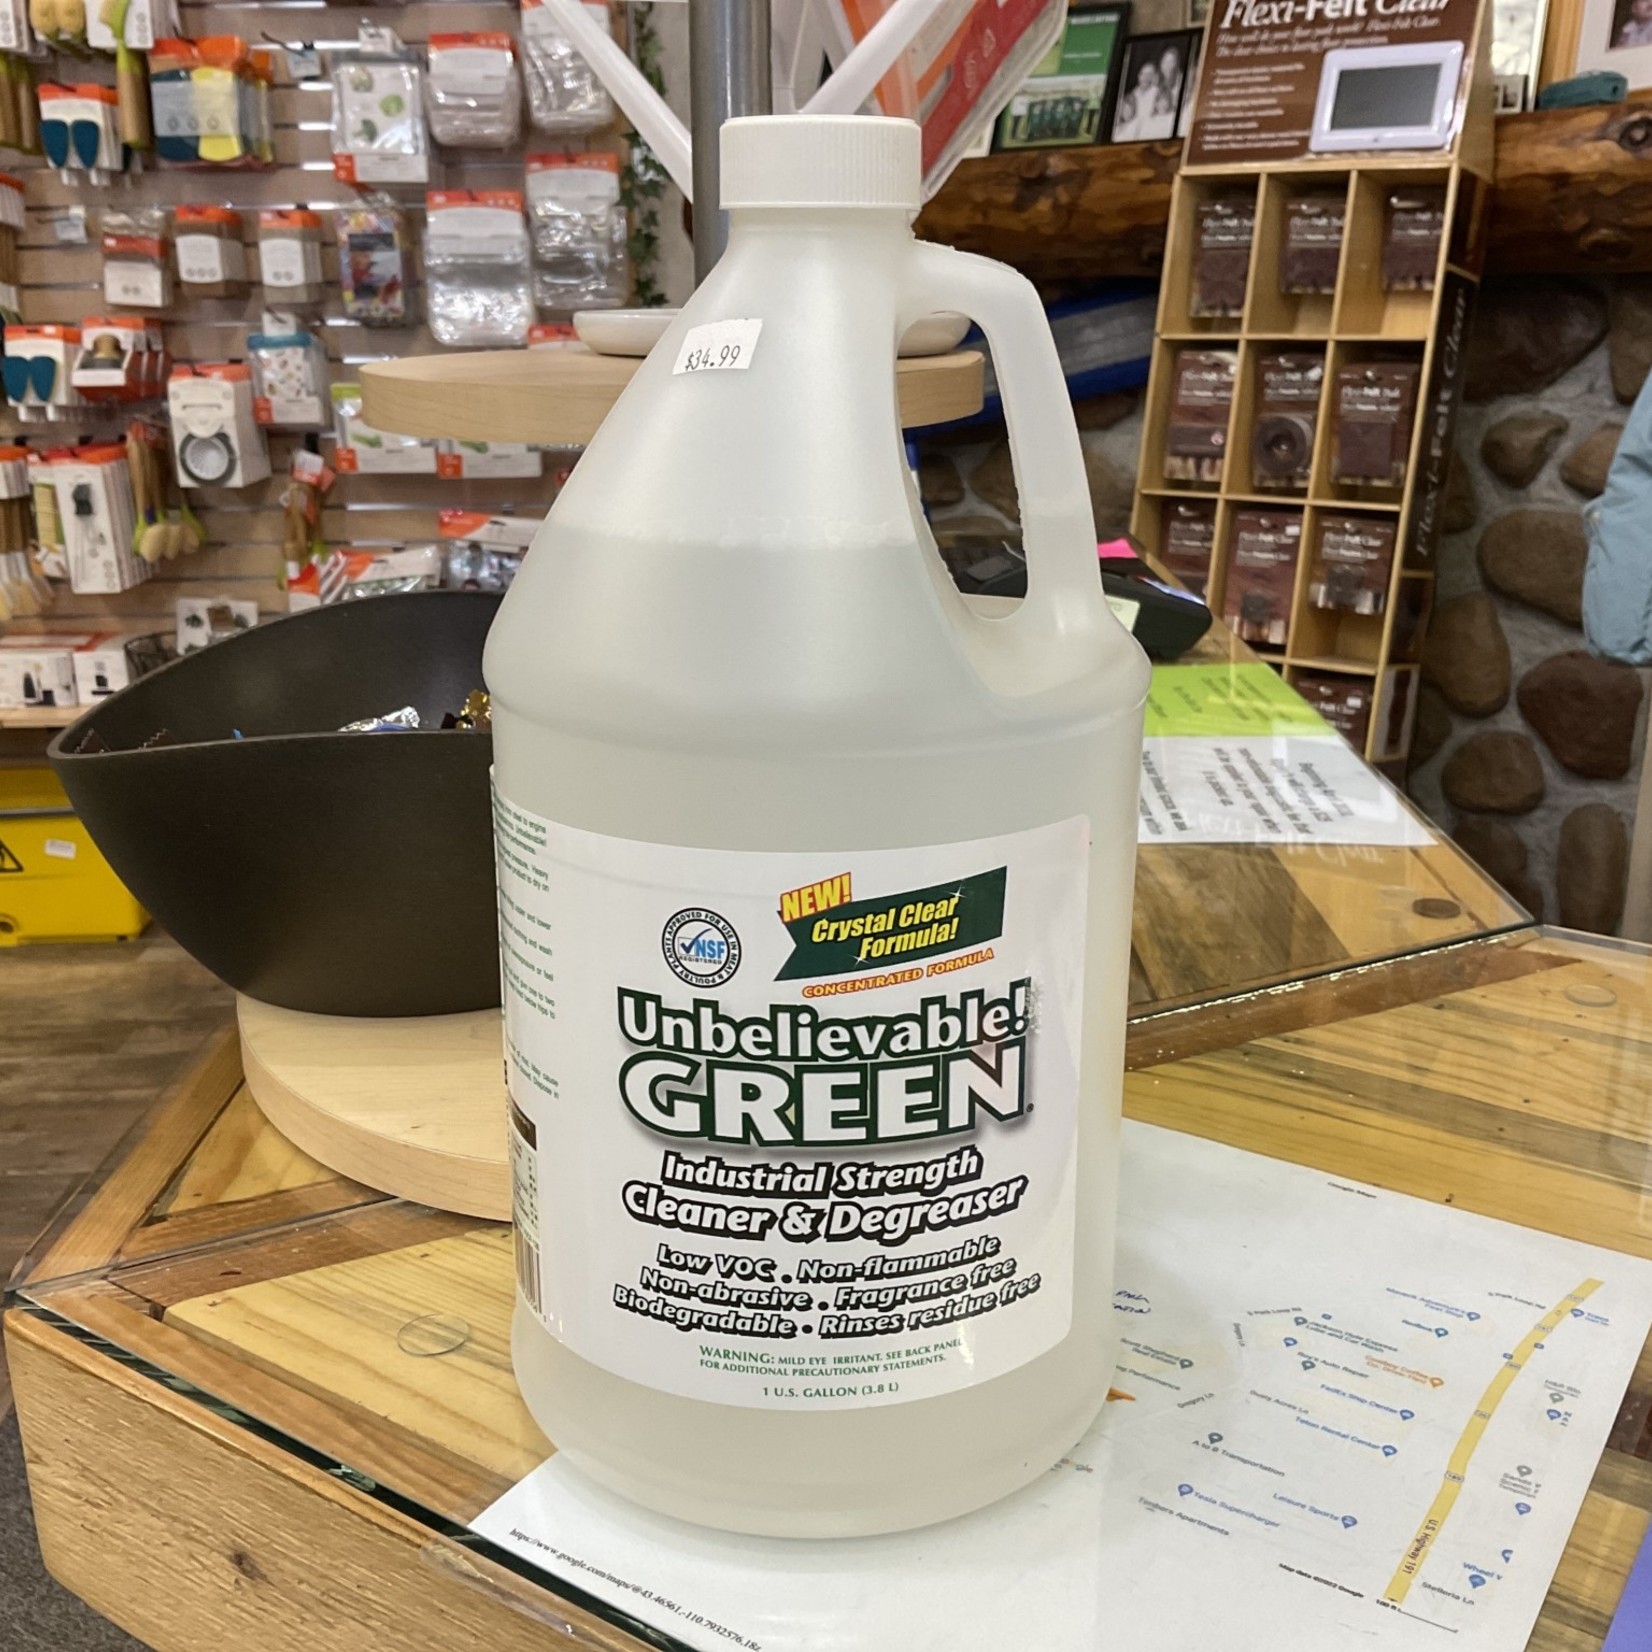 Unbelievable Green Industrial Strength Cleaner & Degreaser 1 gallon